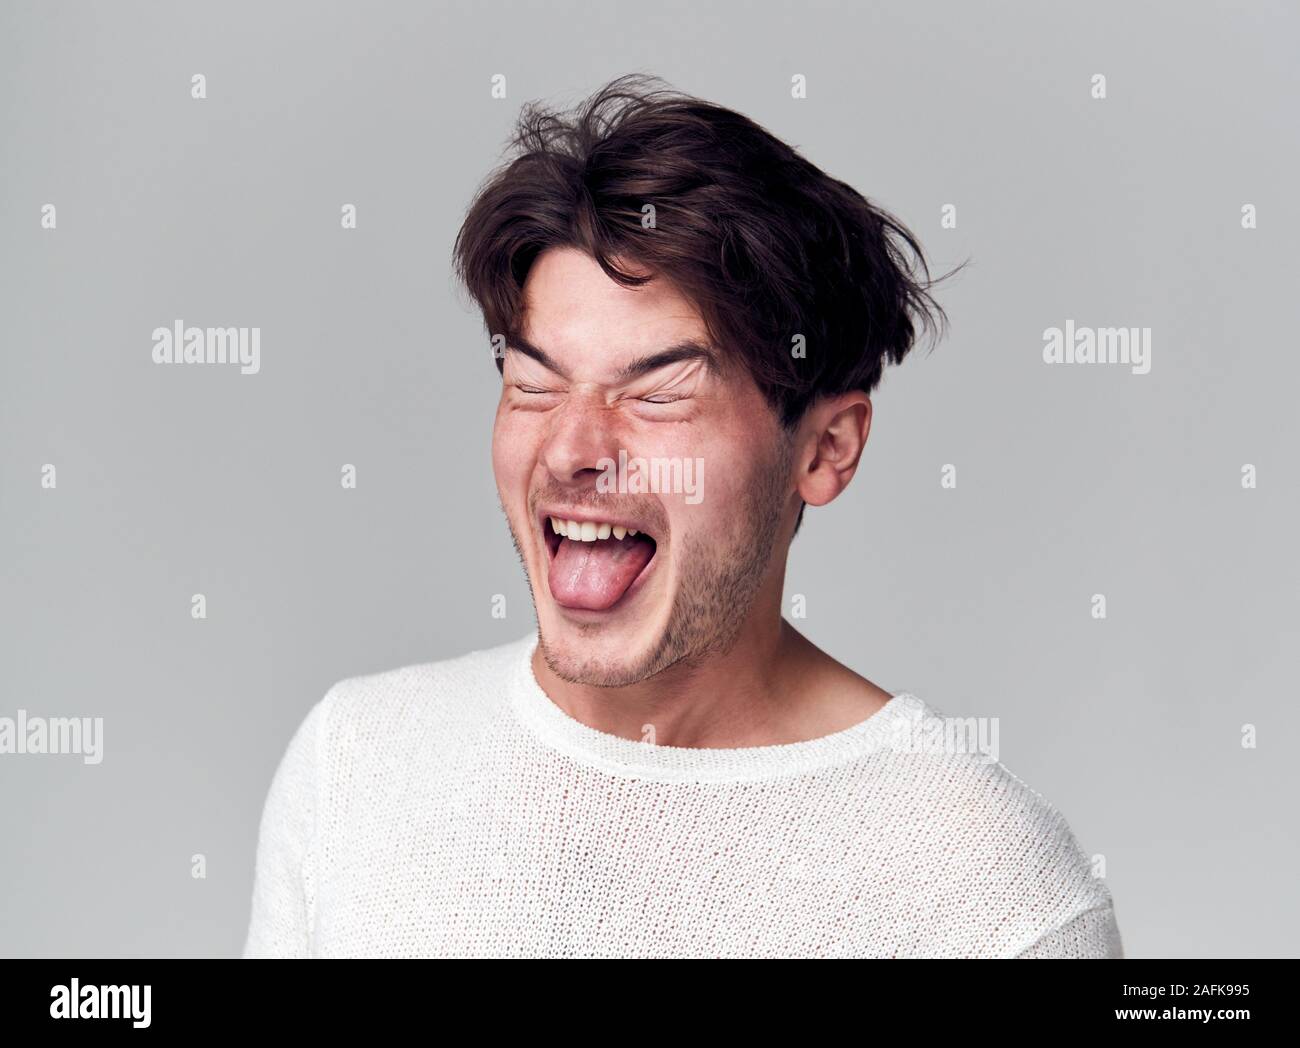 Head And Shoulders Studio Shot Of Man Pulling Faces And Smiling At Camera Stock Photo